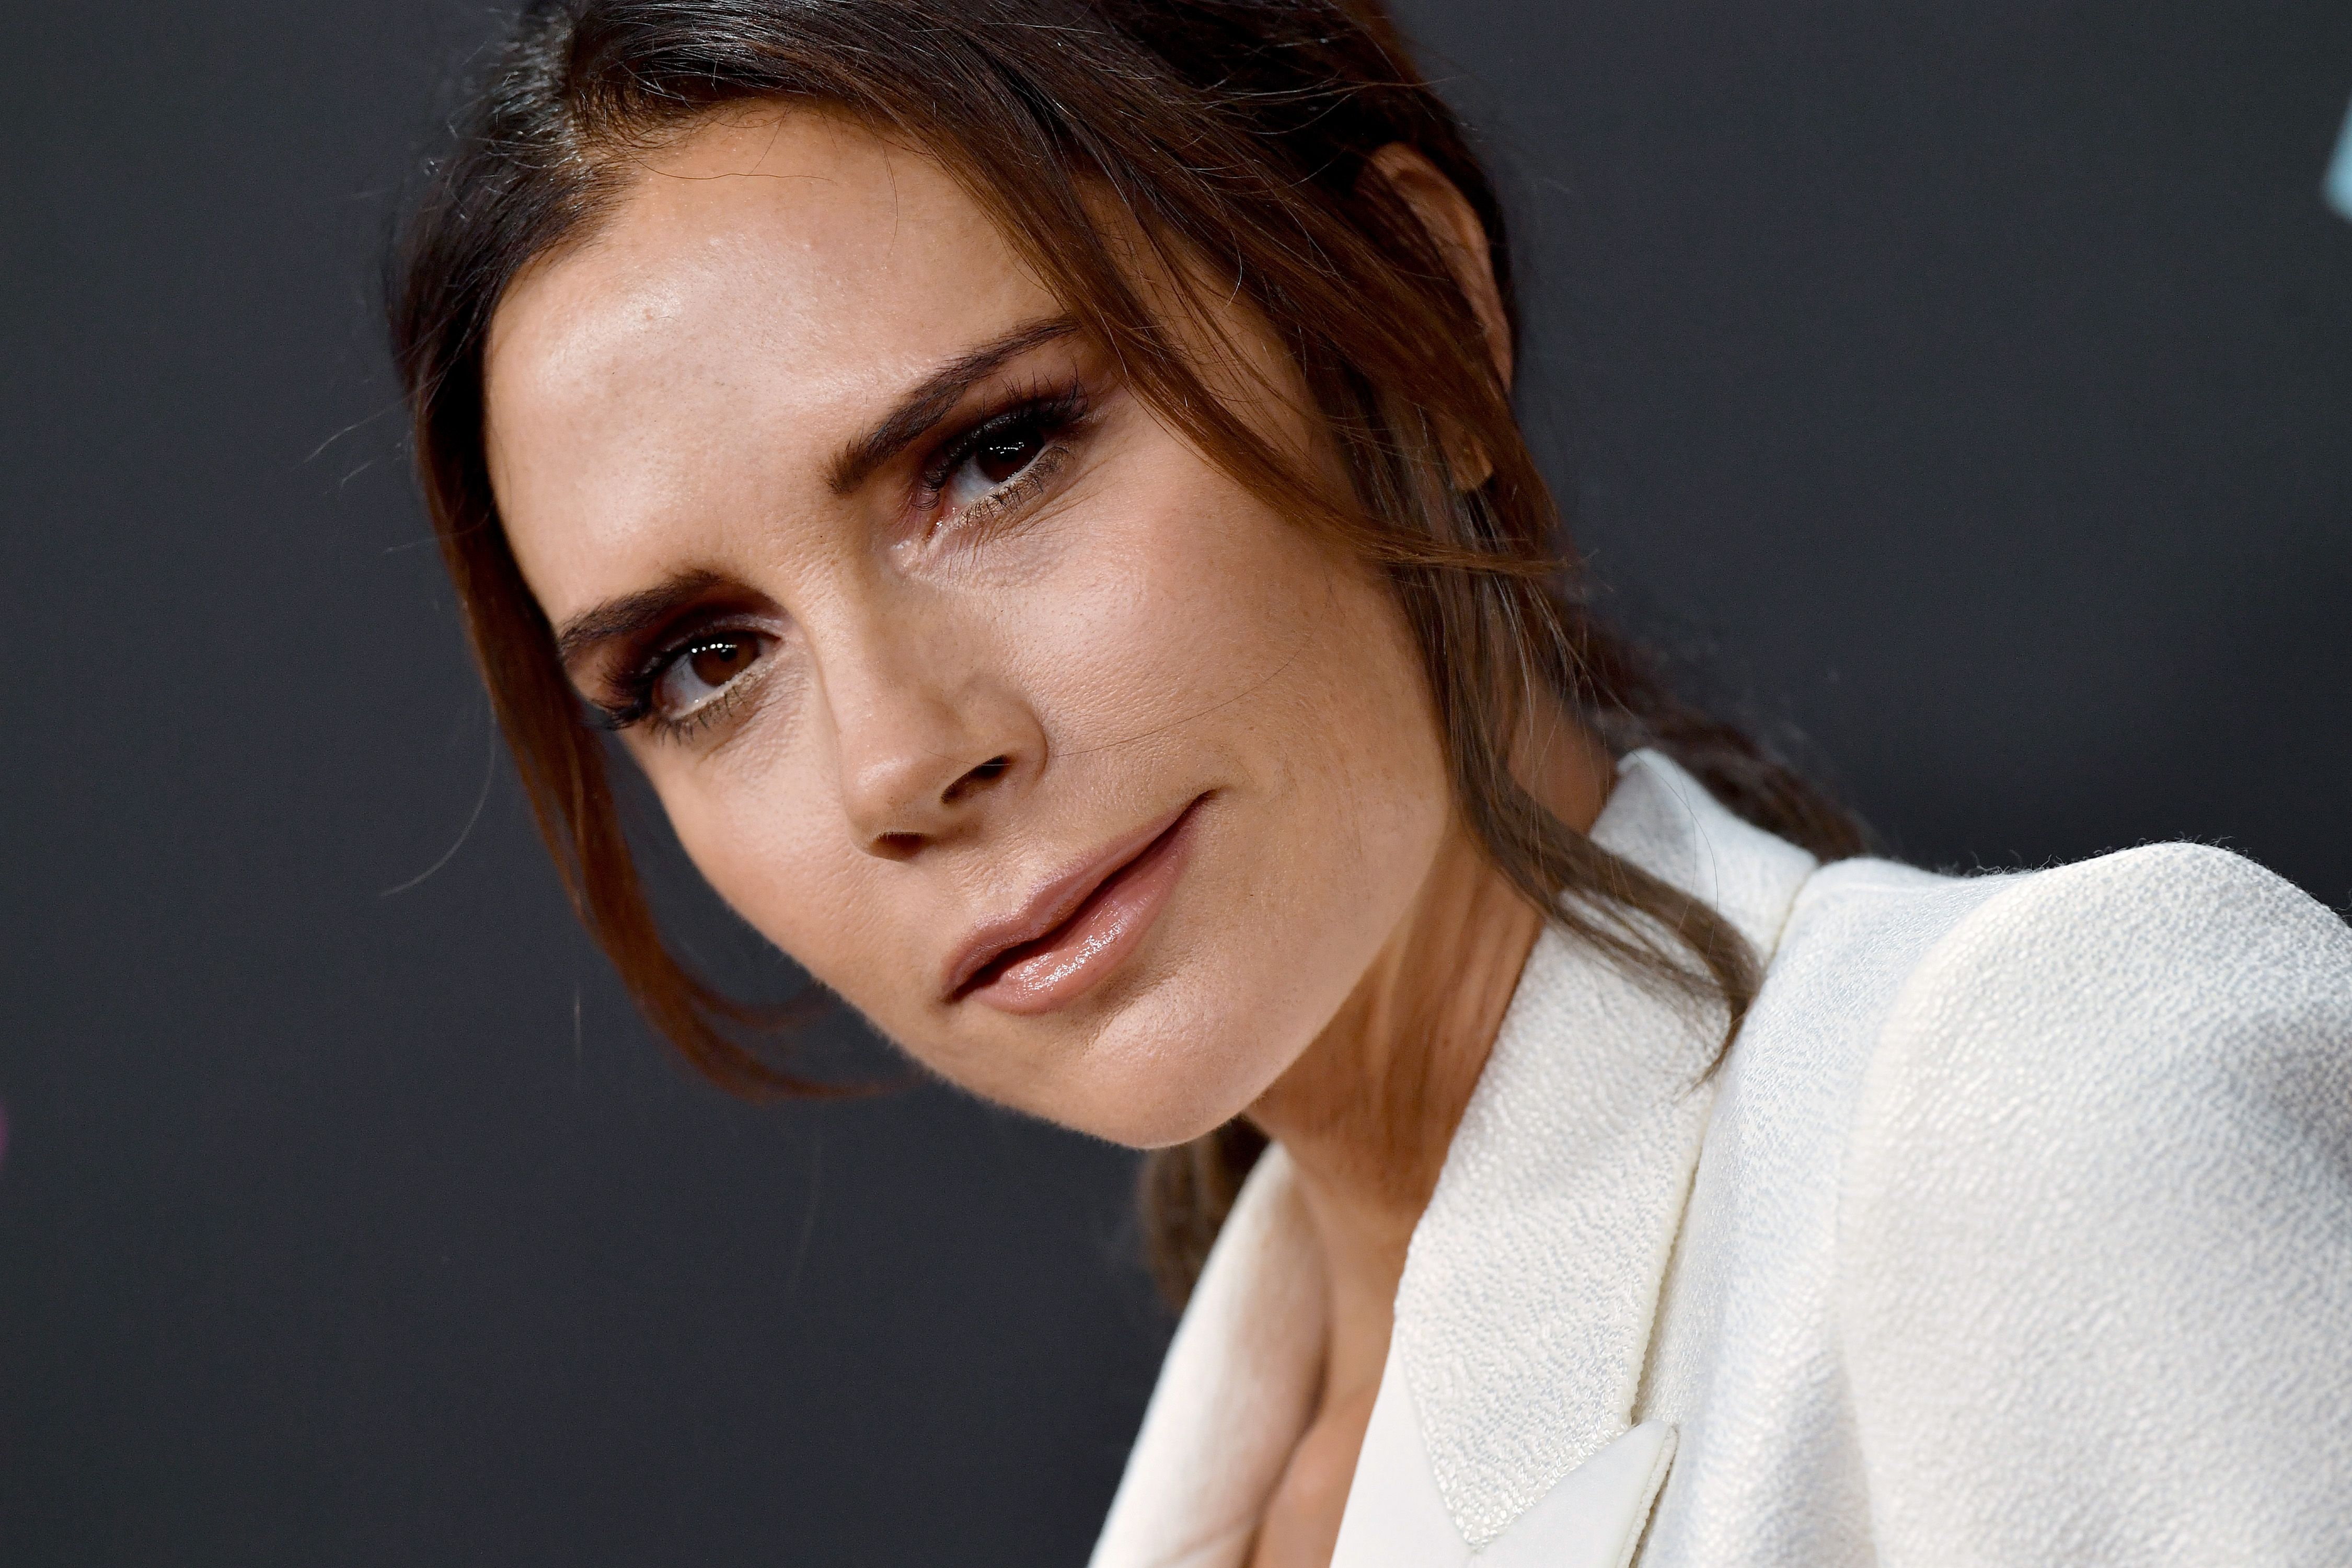 Victoria Beckham Haircut: Too Short, Too Long Or Just Right? (PHOTOS, POLL)  | HuffPost Life